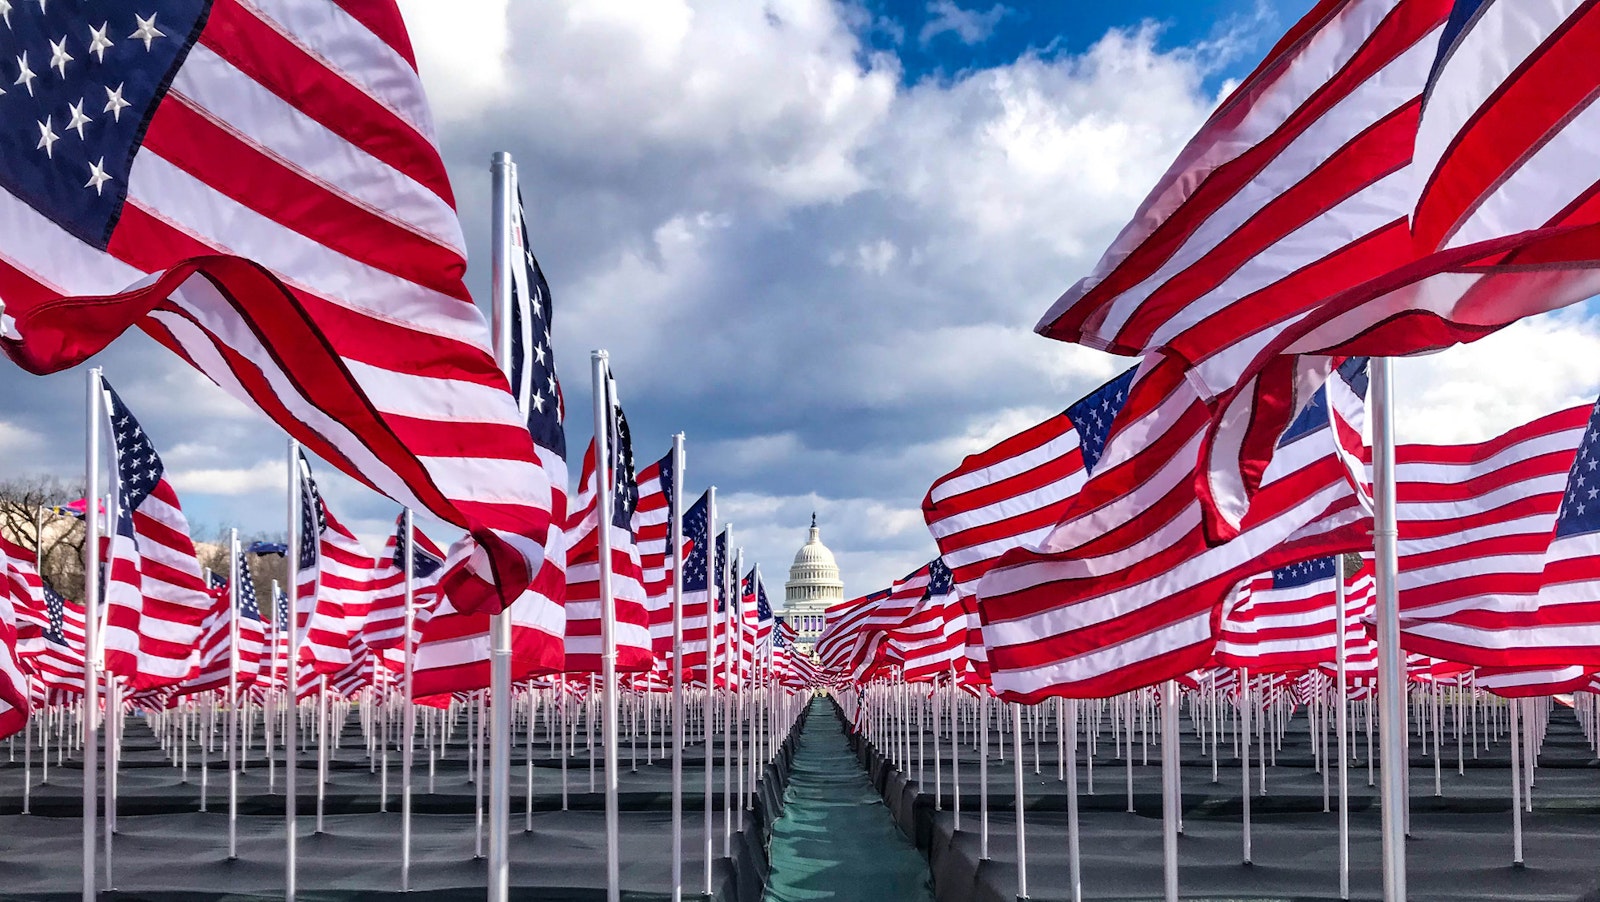 Rows of U.S. flags leading towards the U.S. Capitol building.